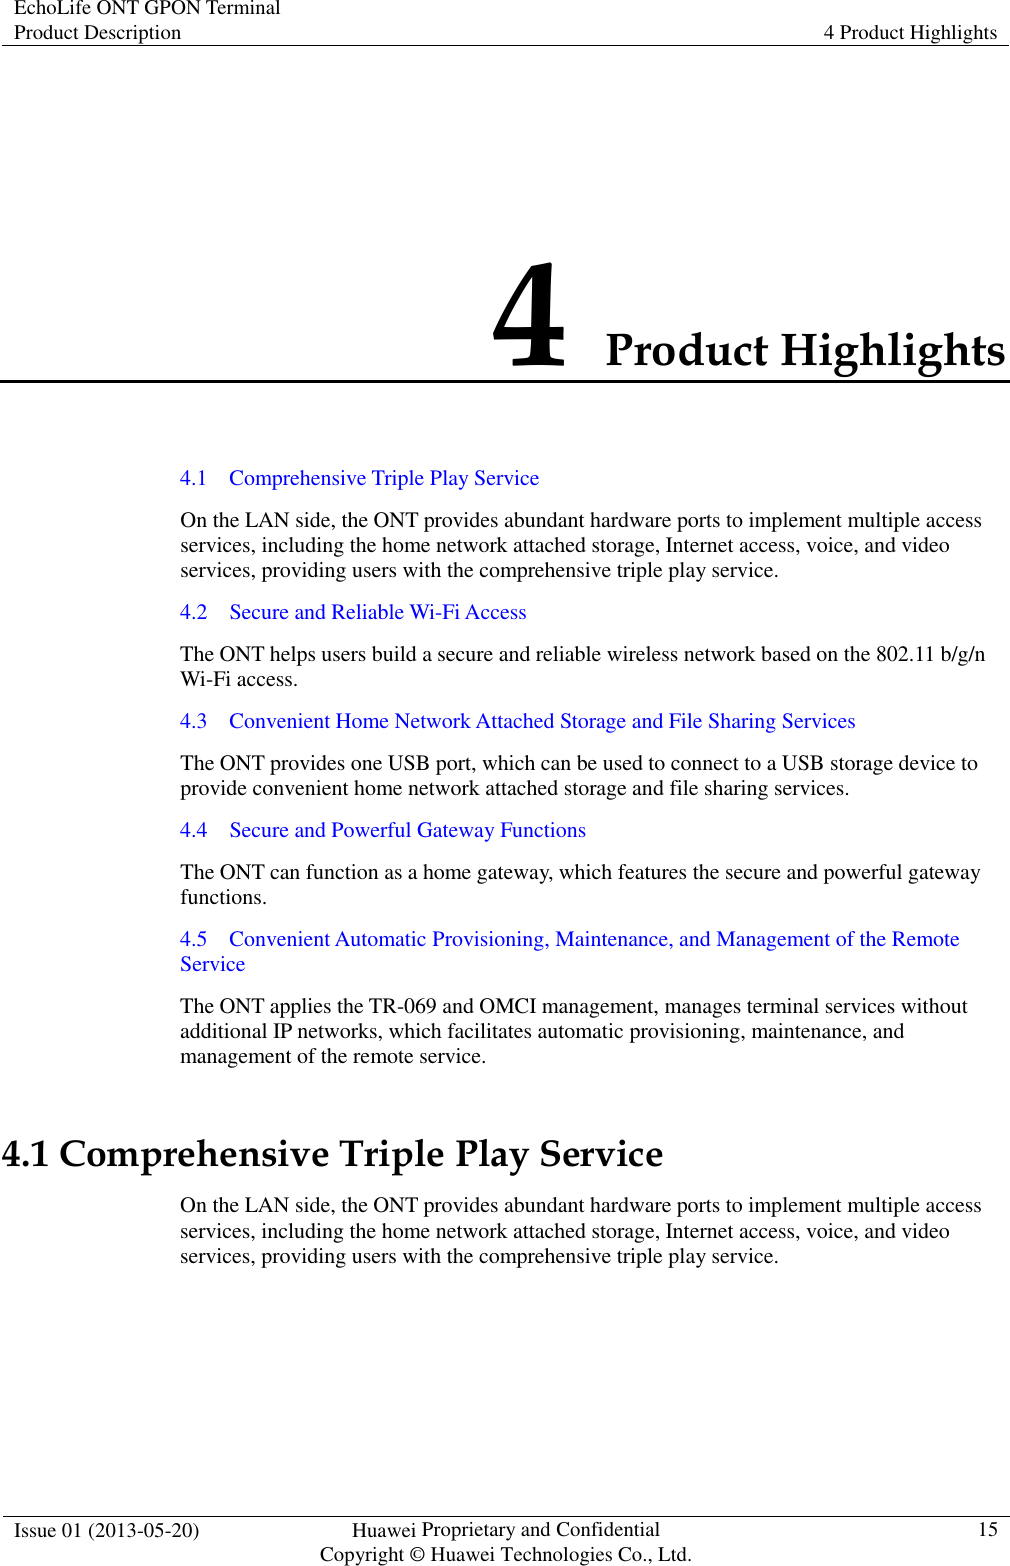 EchoLife ONT GPON Terminal Product Description  4 Product Highlights  Issue 01 (2013-05-20)  Huawei Proprietary and Confidential                                     Copyright © Huawei Technologies Co., Ltd. 15  4 Product Highlights 4.1    Comprehensive Triple Play Service On the LAN side, the ONT provides abundant hardware ports to implement multiple access services, including the home network attached storage, Internet access, voice, and video services, providing users with the comprehensive triple play service. 4.2    Secure and Reliable Wi-Fi Access The ONT helps users build a secure and reliable wireless network based on the 802.11 b/g/n Wi-Fi access. 4.3    Convenient Home Network Attached Storage and File Sharing Services The ONT provides one USB port, which can be used to connect to a USB storage device to provide convenient home network attached storage and file sharing services. 4.4    Secure and Powerful Gateway Functions The ONT can function as a home gateway, which features the secure and powerful gateway functions. 4.5    Convenient Automatic Provisioning, Maintenance, and Management of the Remote Service The ONT applies the TR-069 and OMCI management, manages terminal services without additional IP networks, which facilitates automatic provisioning, maintenance, and management of the remote service. 4.1 Comprehensive Triple Play Service On the LAN side, the ONT provides abundant hardware ports to implement multiple access services, including the home network attached storage, Internet access, voice, and video services, providing users with the comprehensive triple play service. 